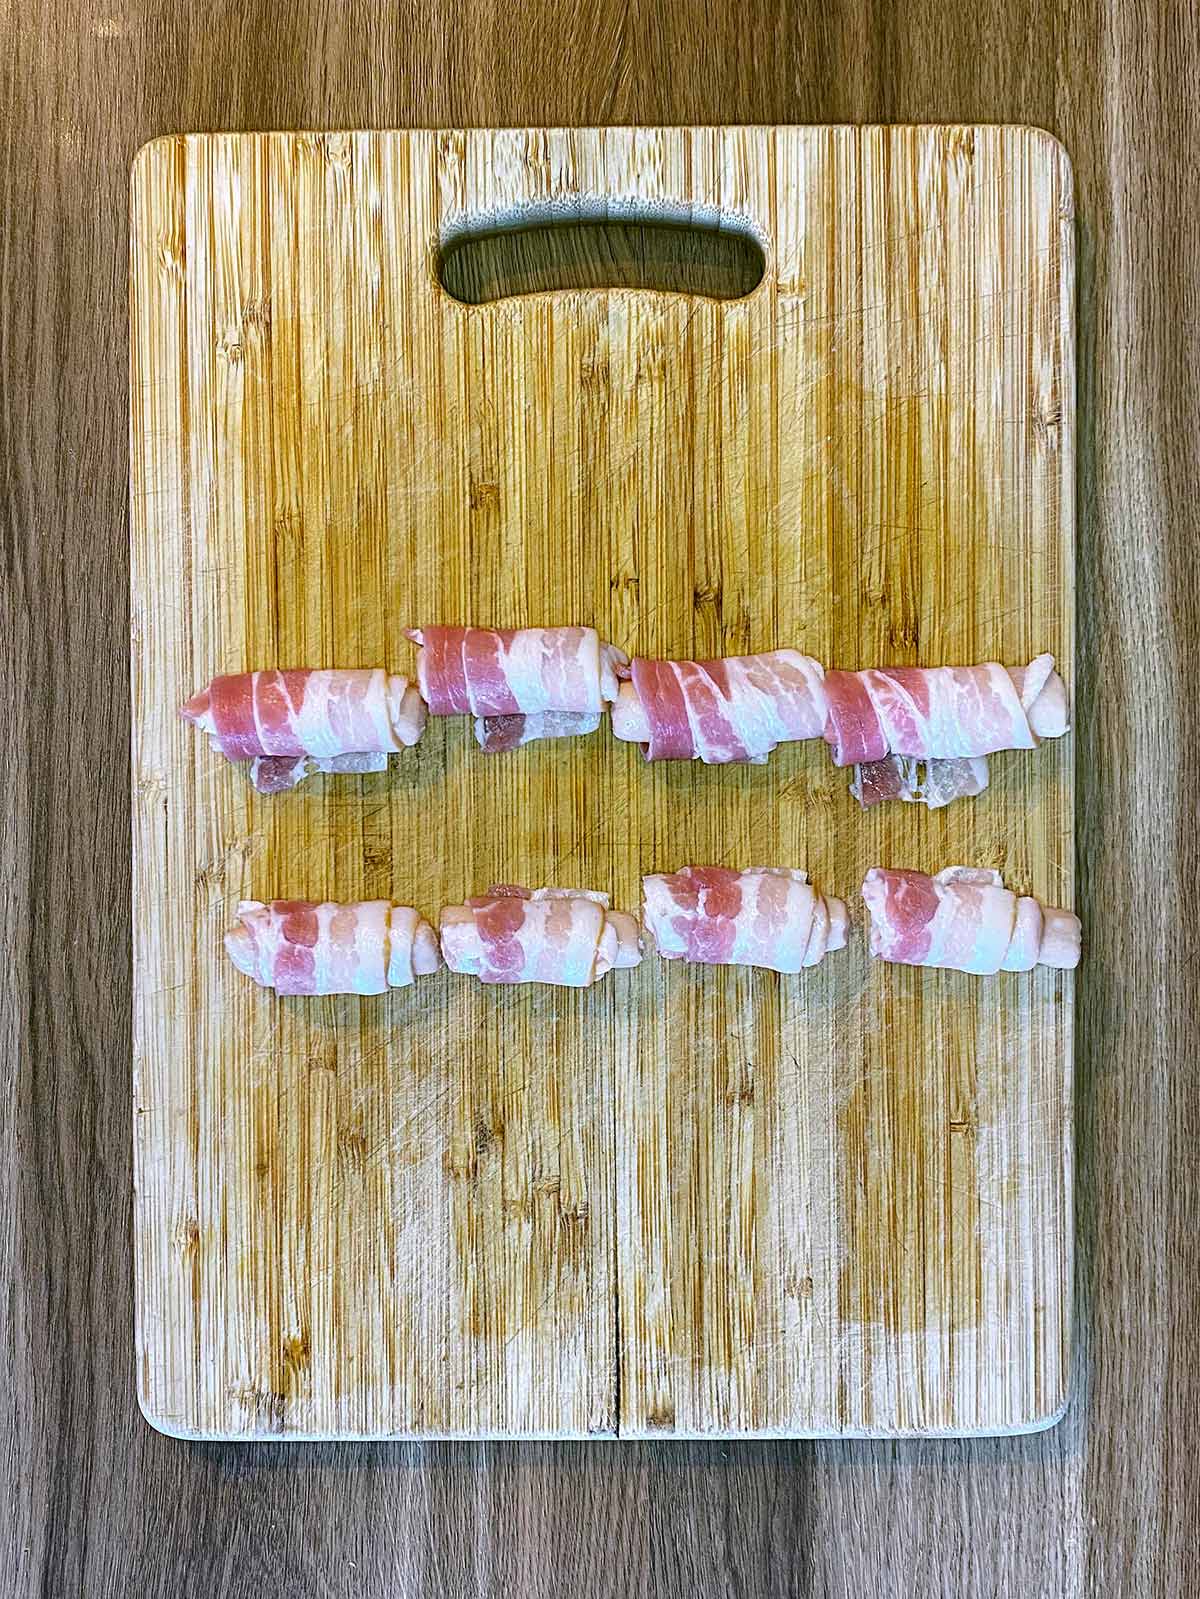 The sausages rolled up in the bacon.